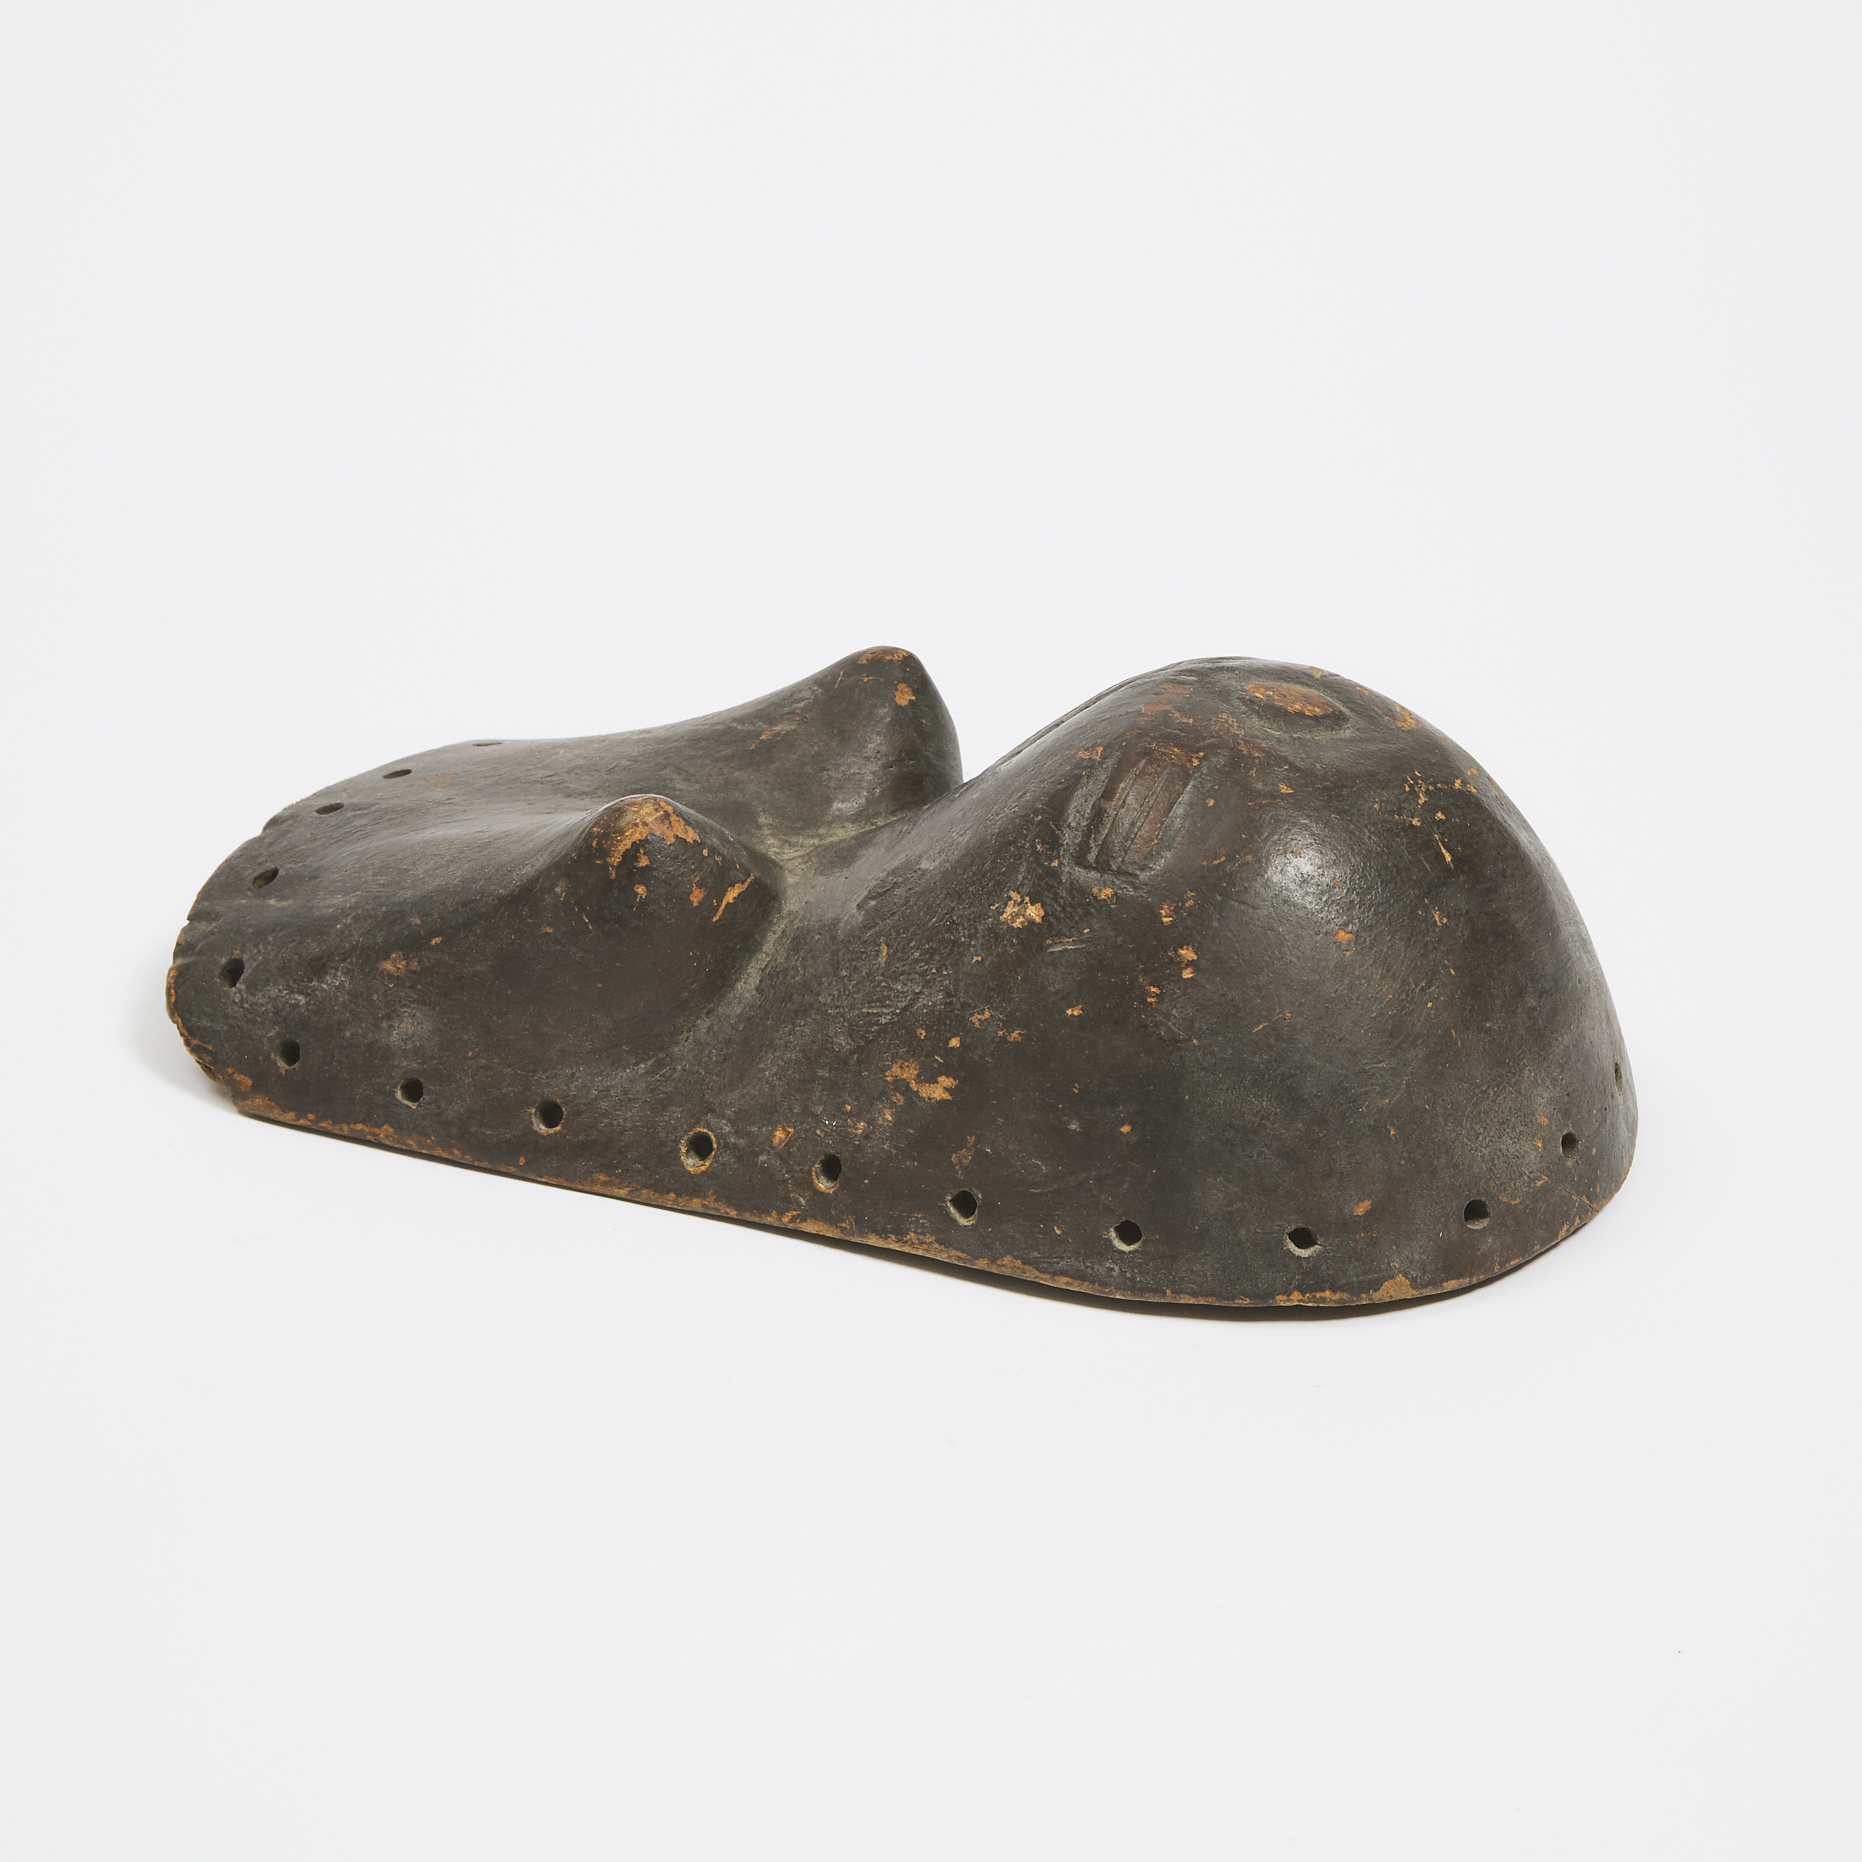 Makonde Body Mask, Tanzania, East Africa, late 19th to early century